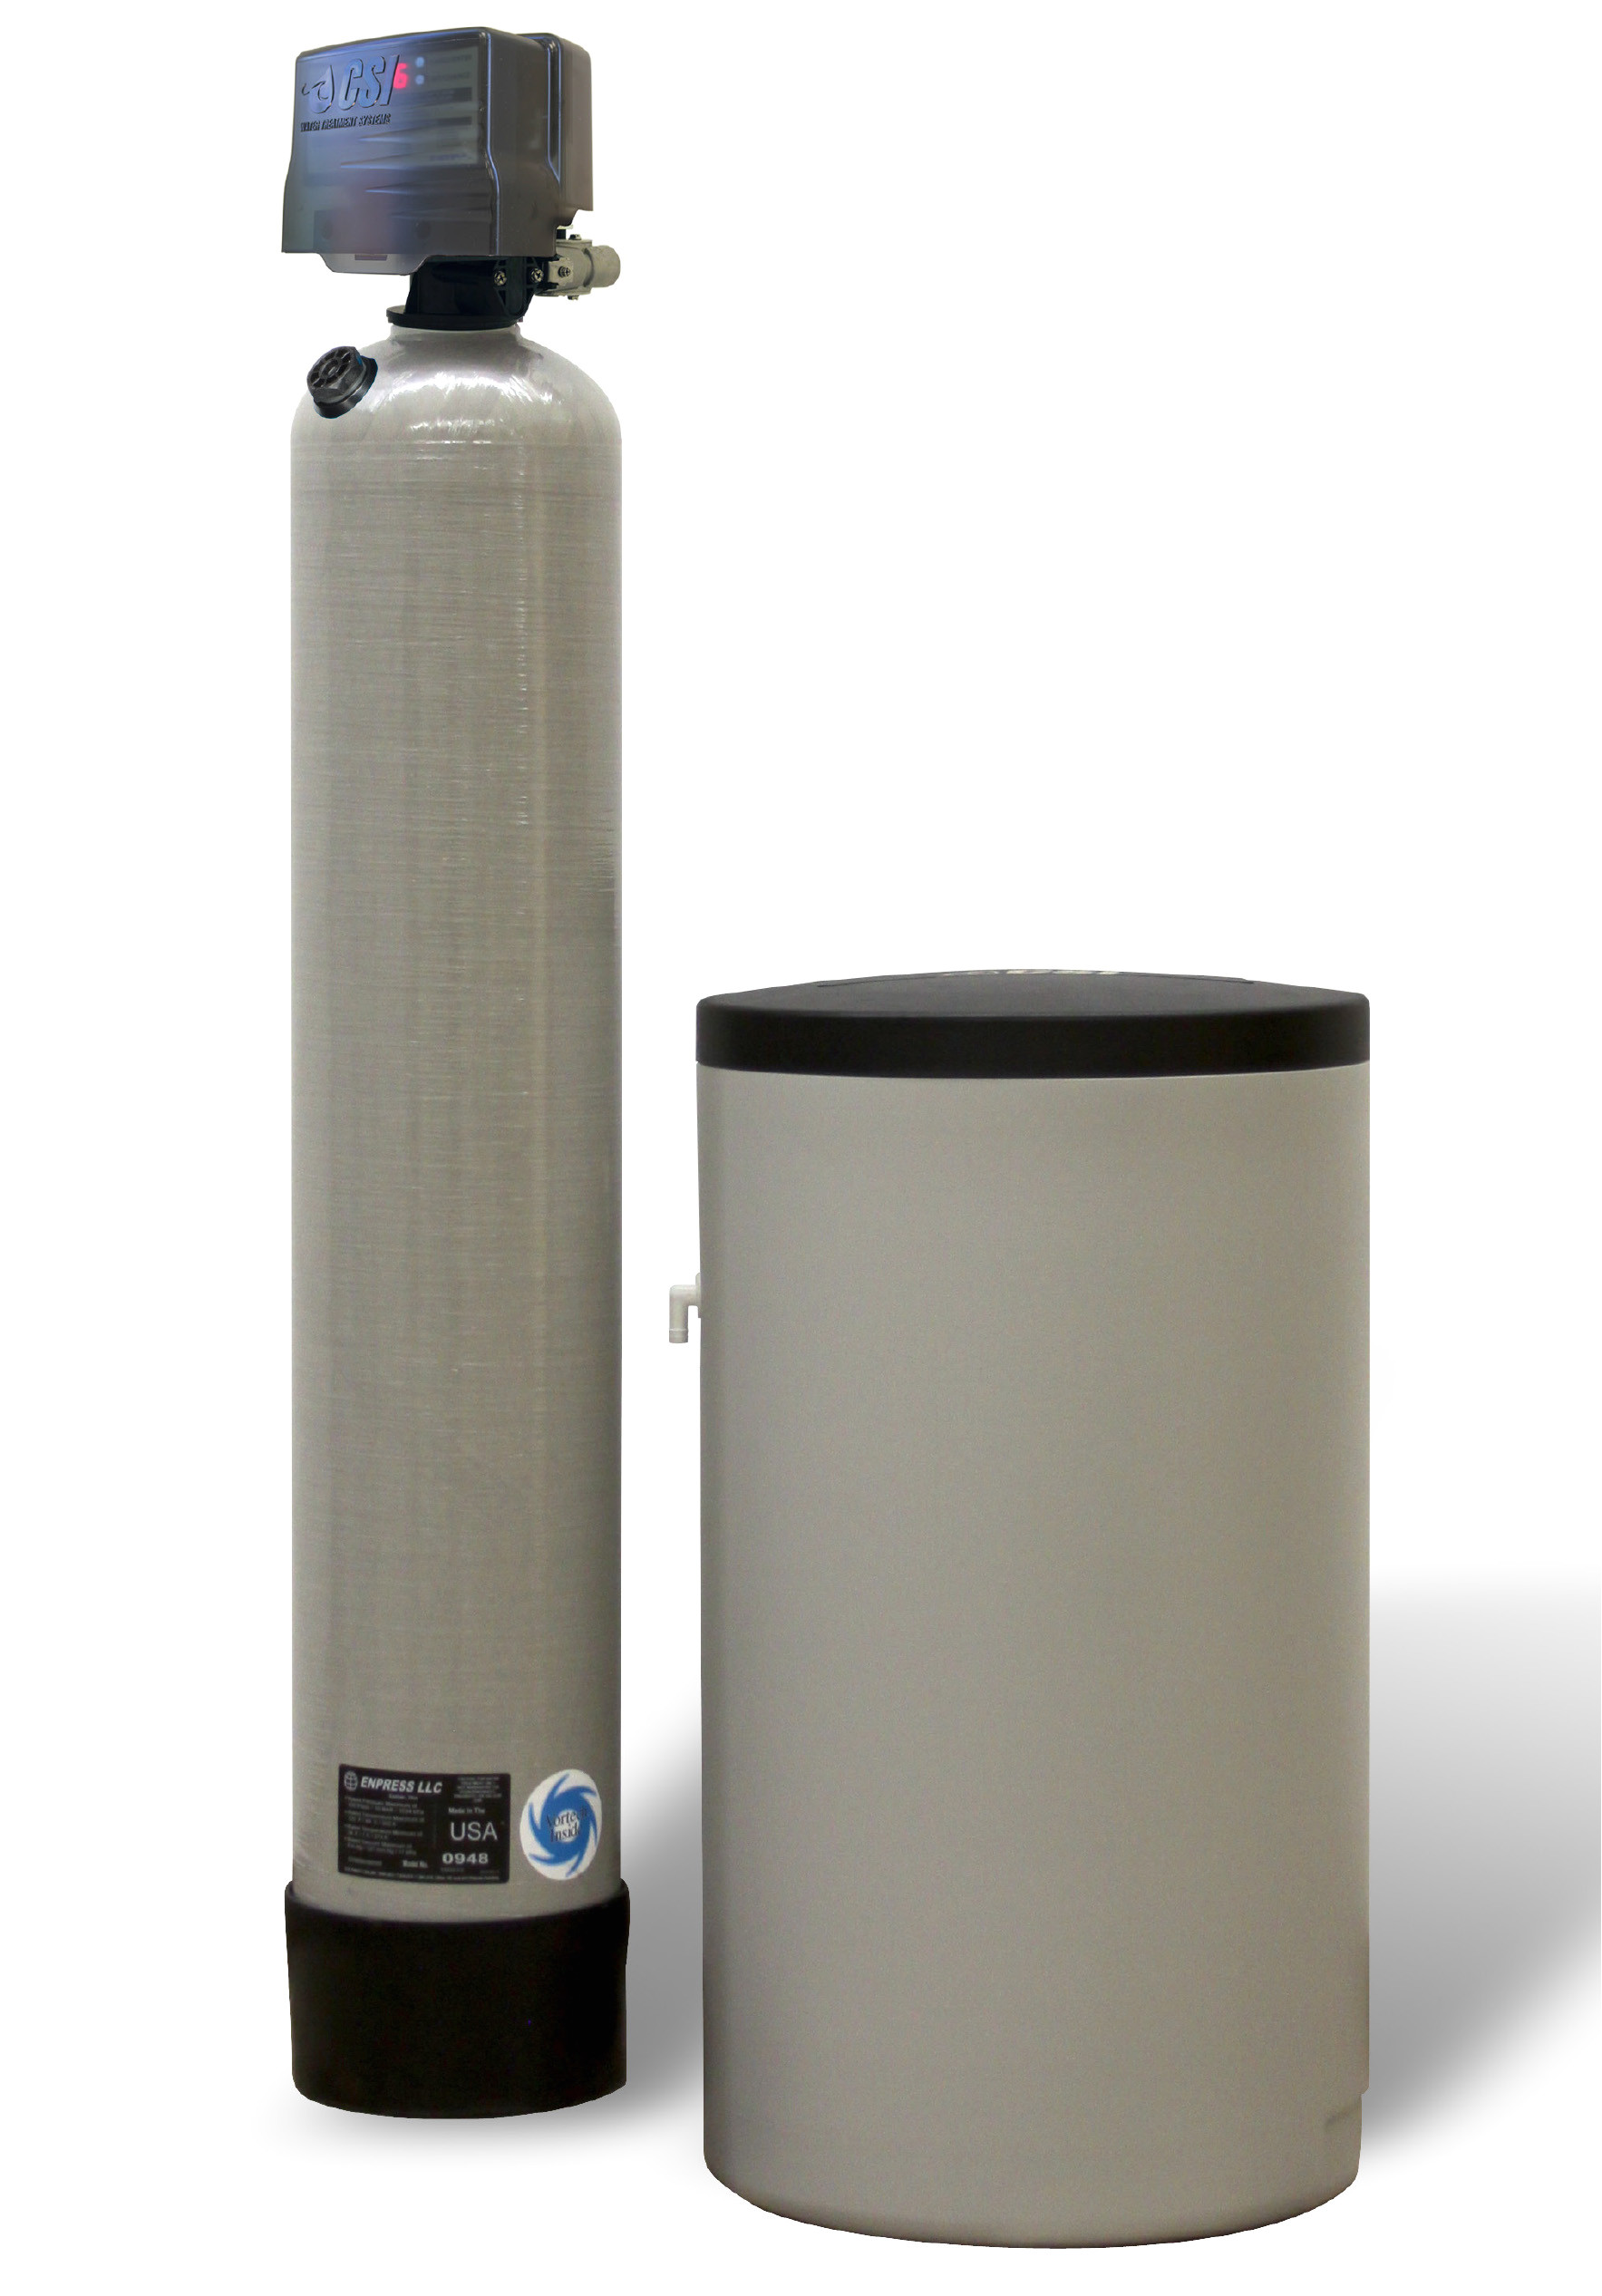 Culligan Water softener Rental Prices Rent or Buy Water softener Water softener Filter Combination Systems